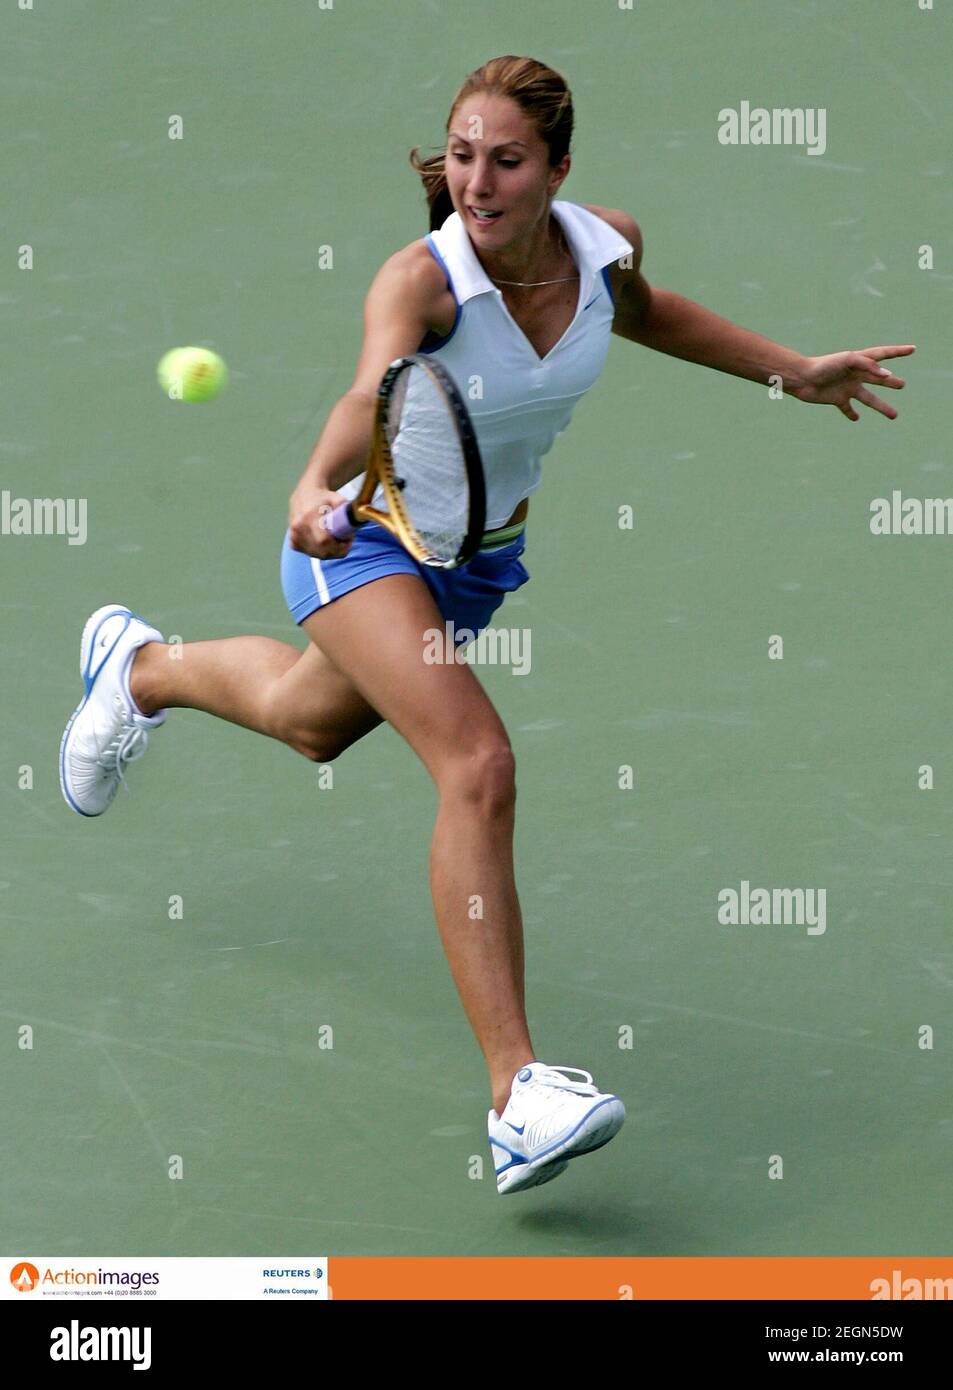 Tennis - Rogers Cup, Sony Ericsson WTA Tour - Montreal, Canada - 16/8/06  Anastasia Myskina of Russia chases a shot from Shahar Peer of Israel at the Rogers Cup, Sony Ericsson WTA Tour in Montreal, Canada August 16, 2006  Mandatory Credit: Action Images / Chris Wattie  Livepic Stock Photo